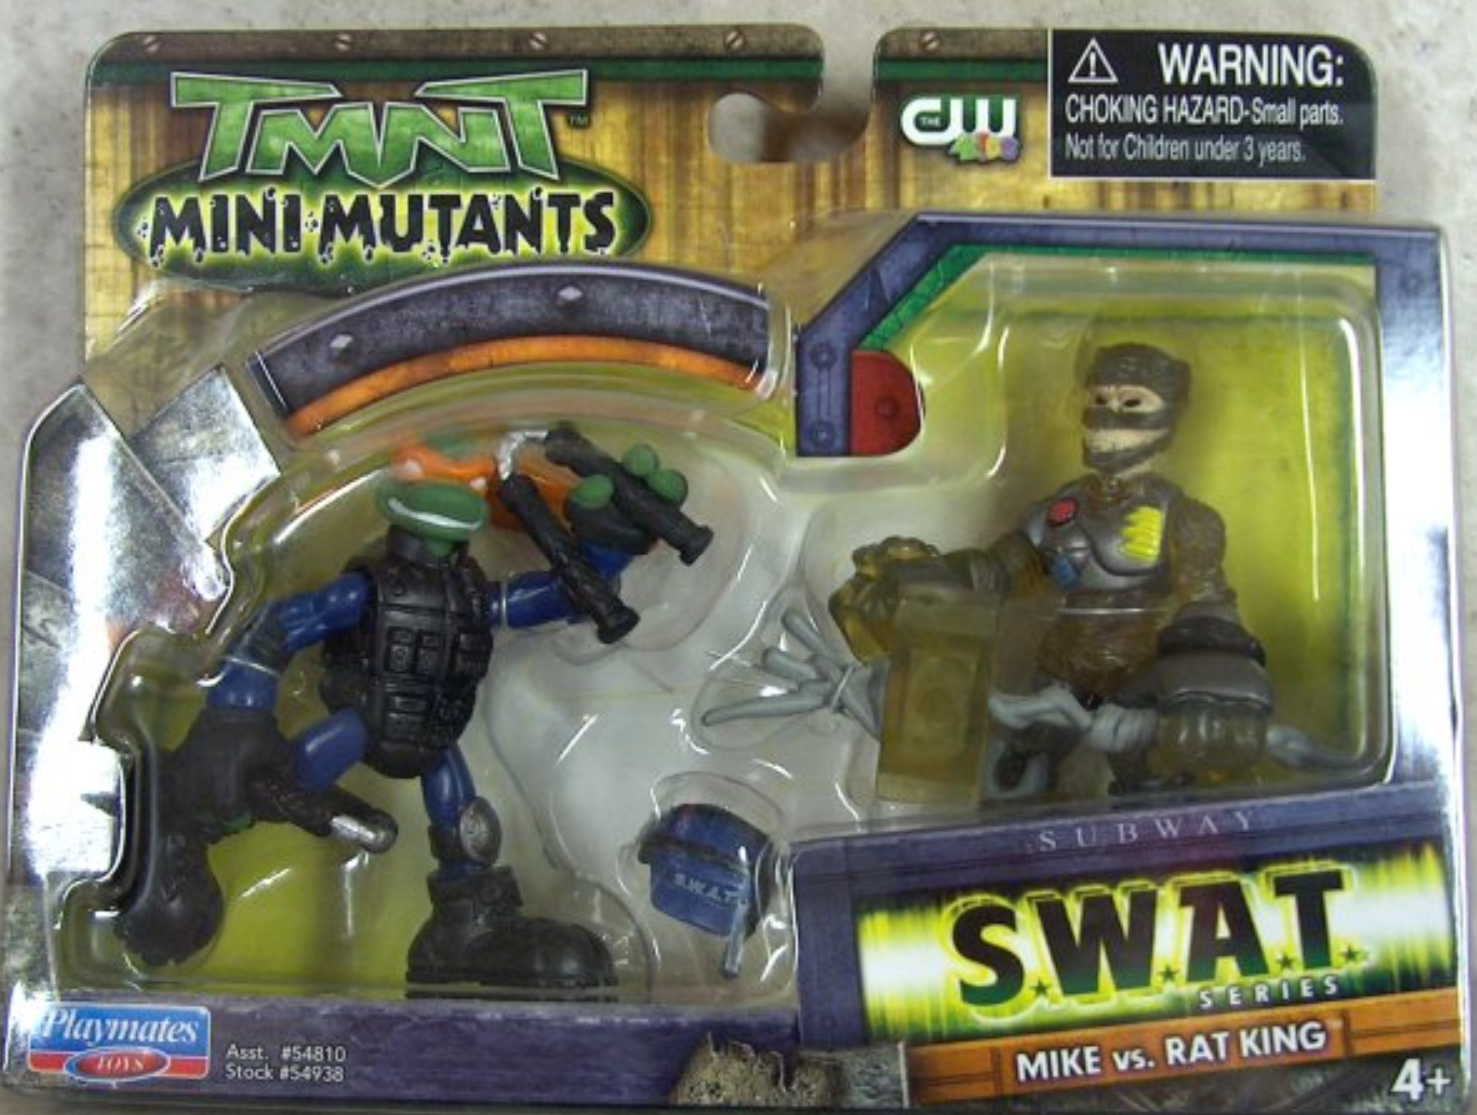 https://static.wikia.nocookie.net/tmnt/images/9/9f/MiniM-SWAT-Mike-v-Rat_King-2009.png/revision/latest?cb=20230911022904